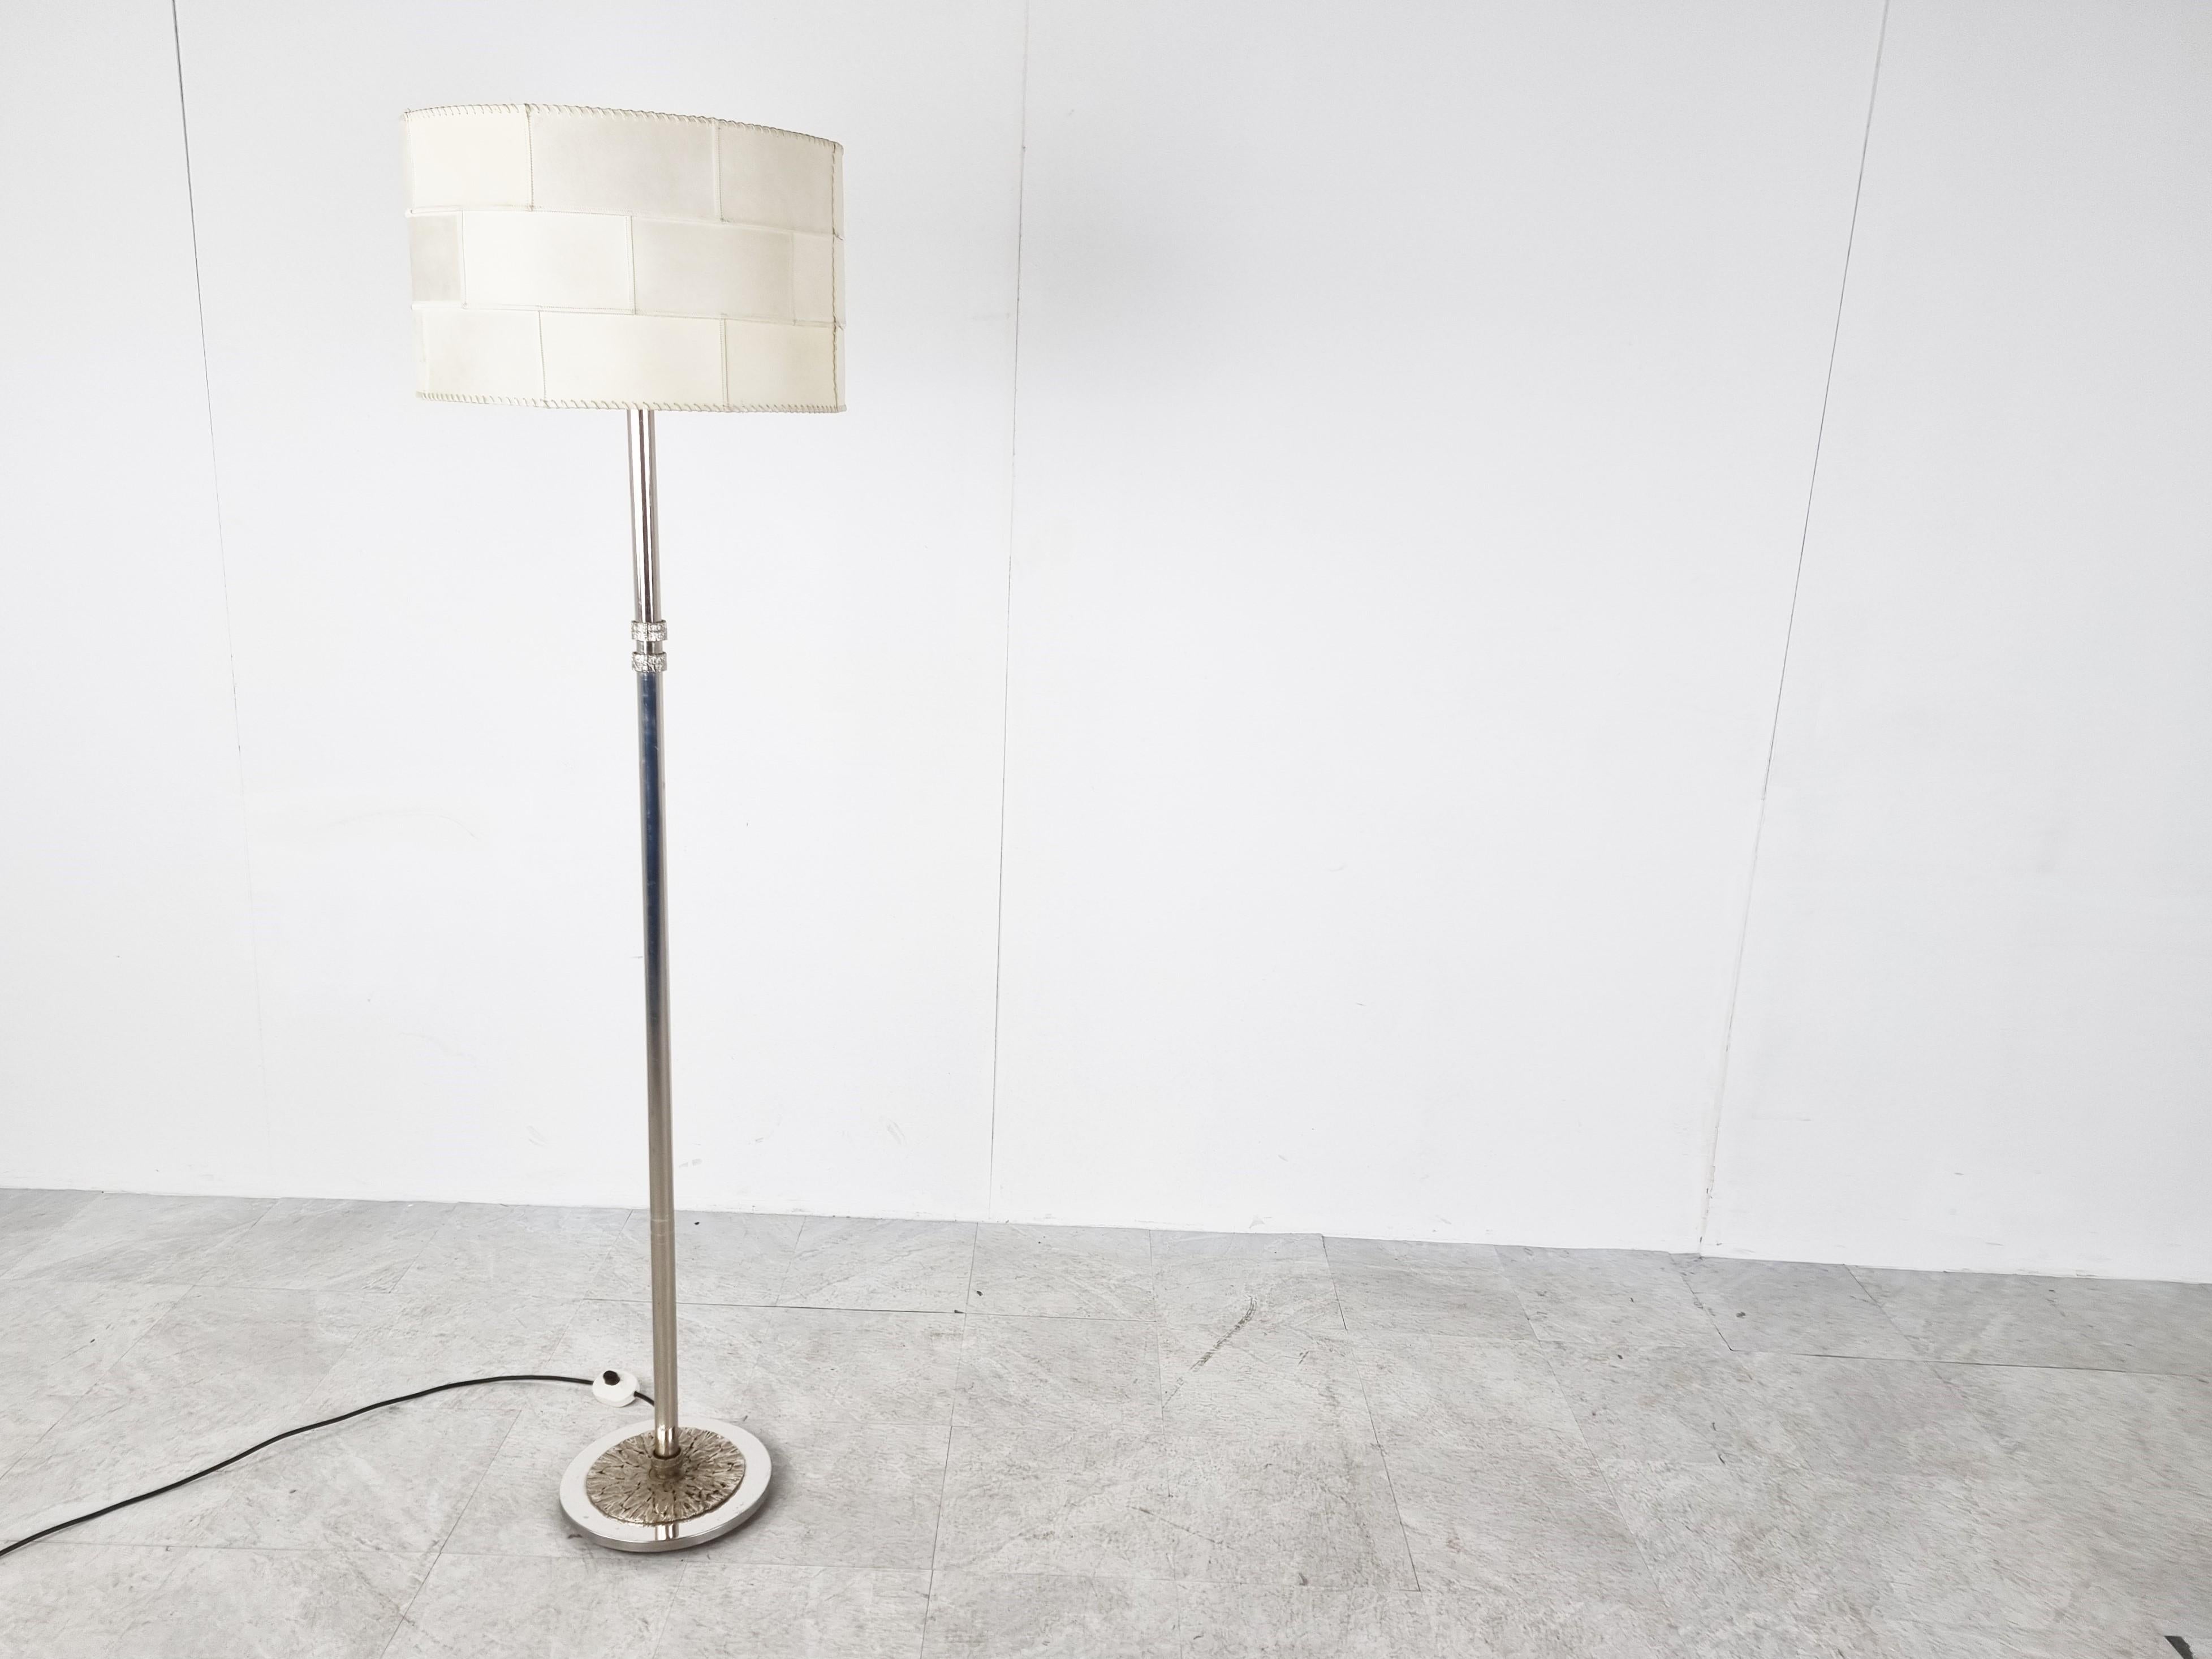 Unique chromed metal floor lamp.

It has a nice sculpted brutalist style base and also features two brutalist design details in the middle of the chromed rod.

The lamp has an original seventies patchwork parchment lamp shade which emits a dim